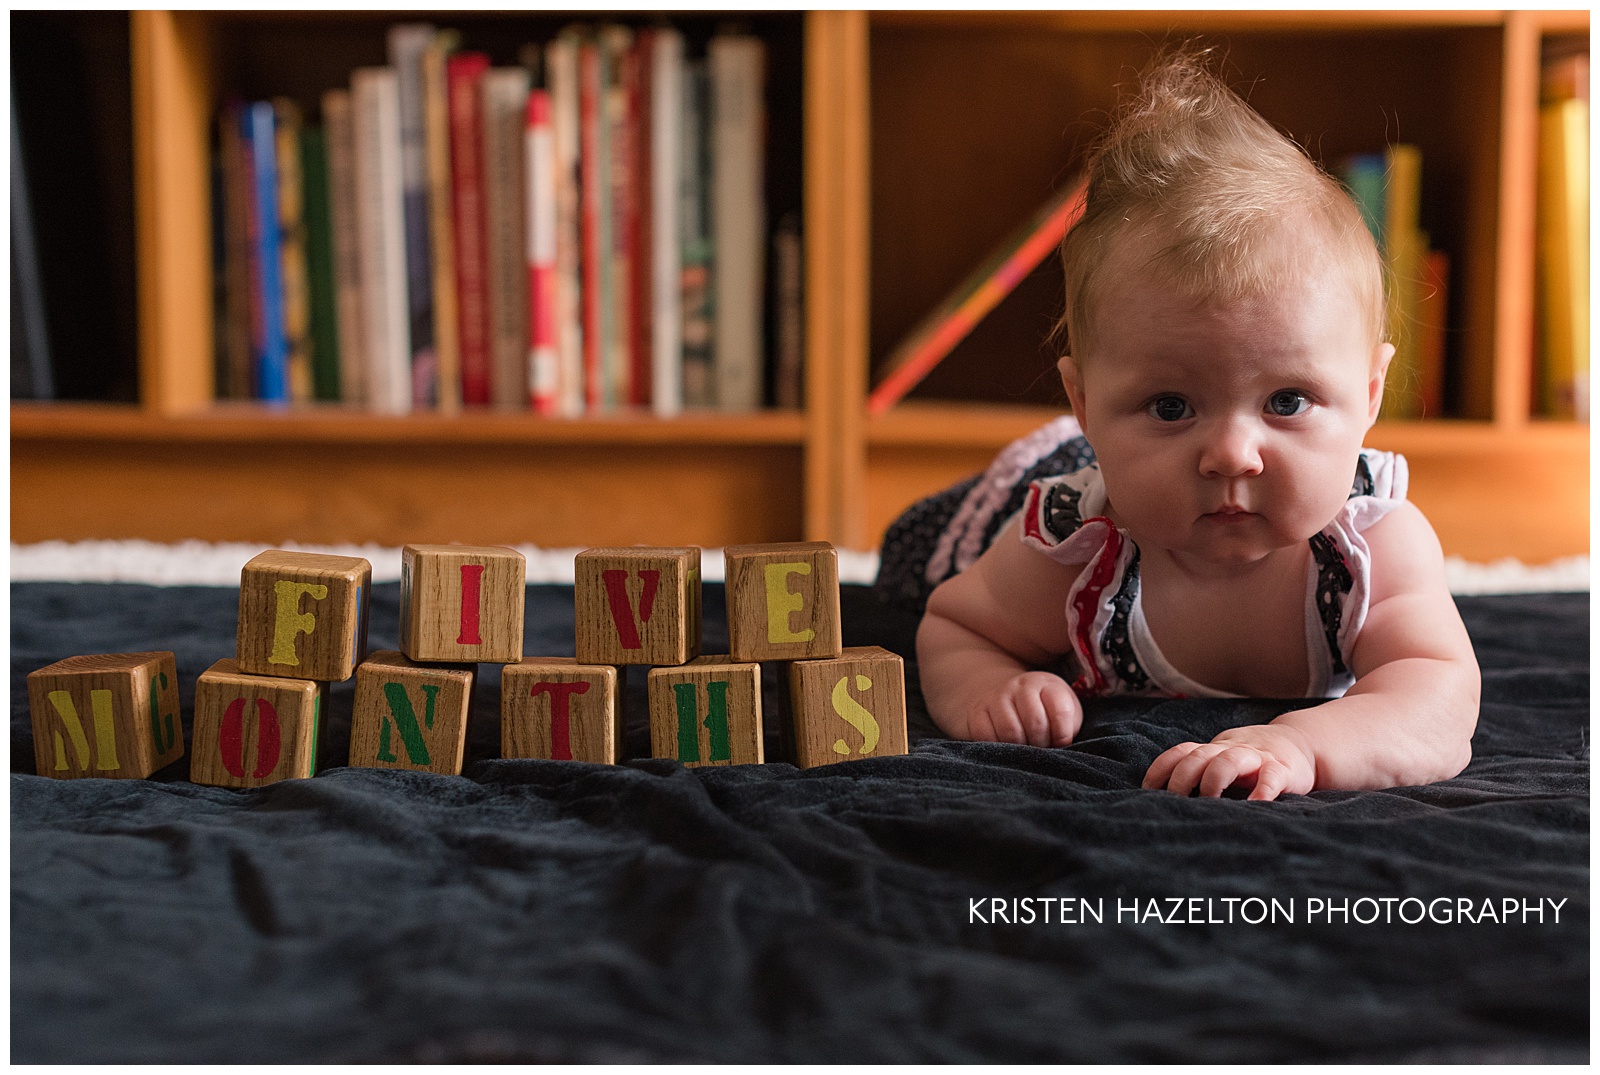 Baby with blocks that read "Five months"